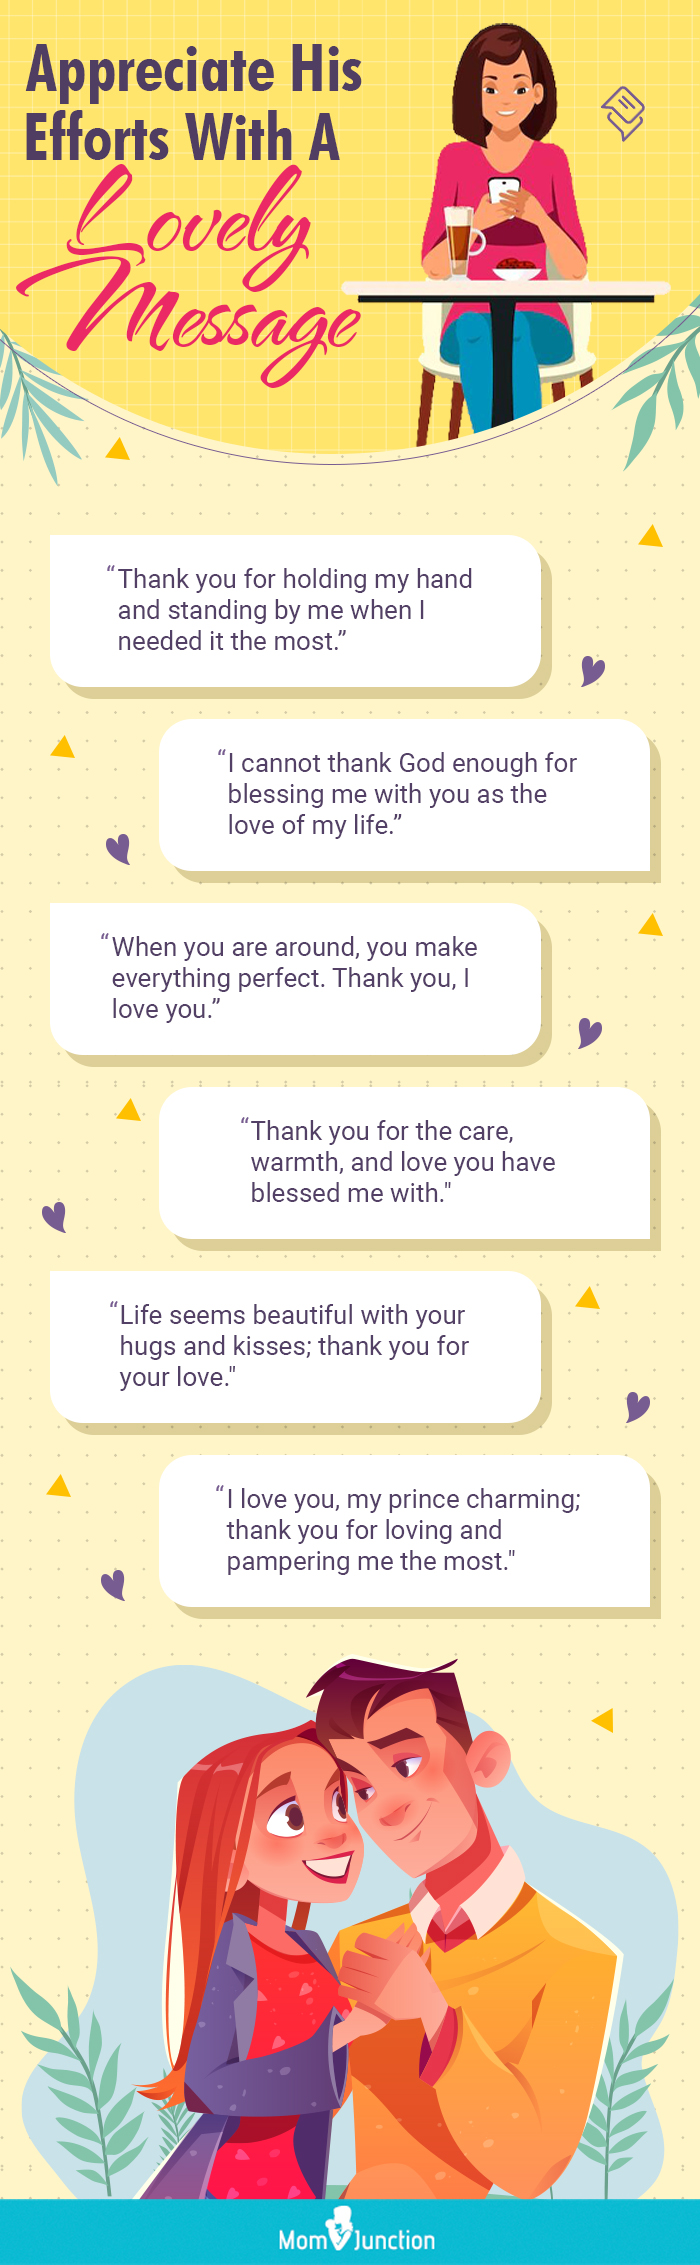 adorable quotes for your boyfriend